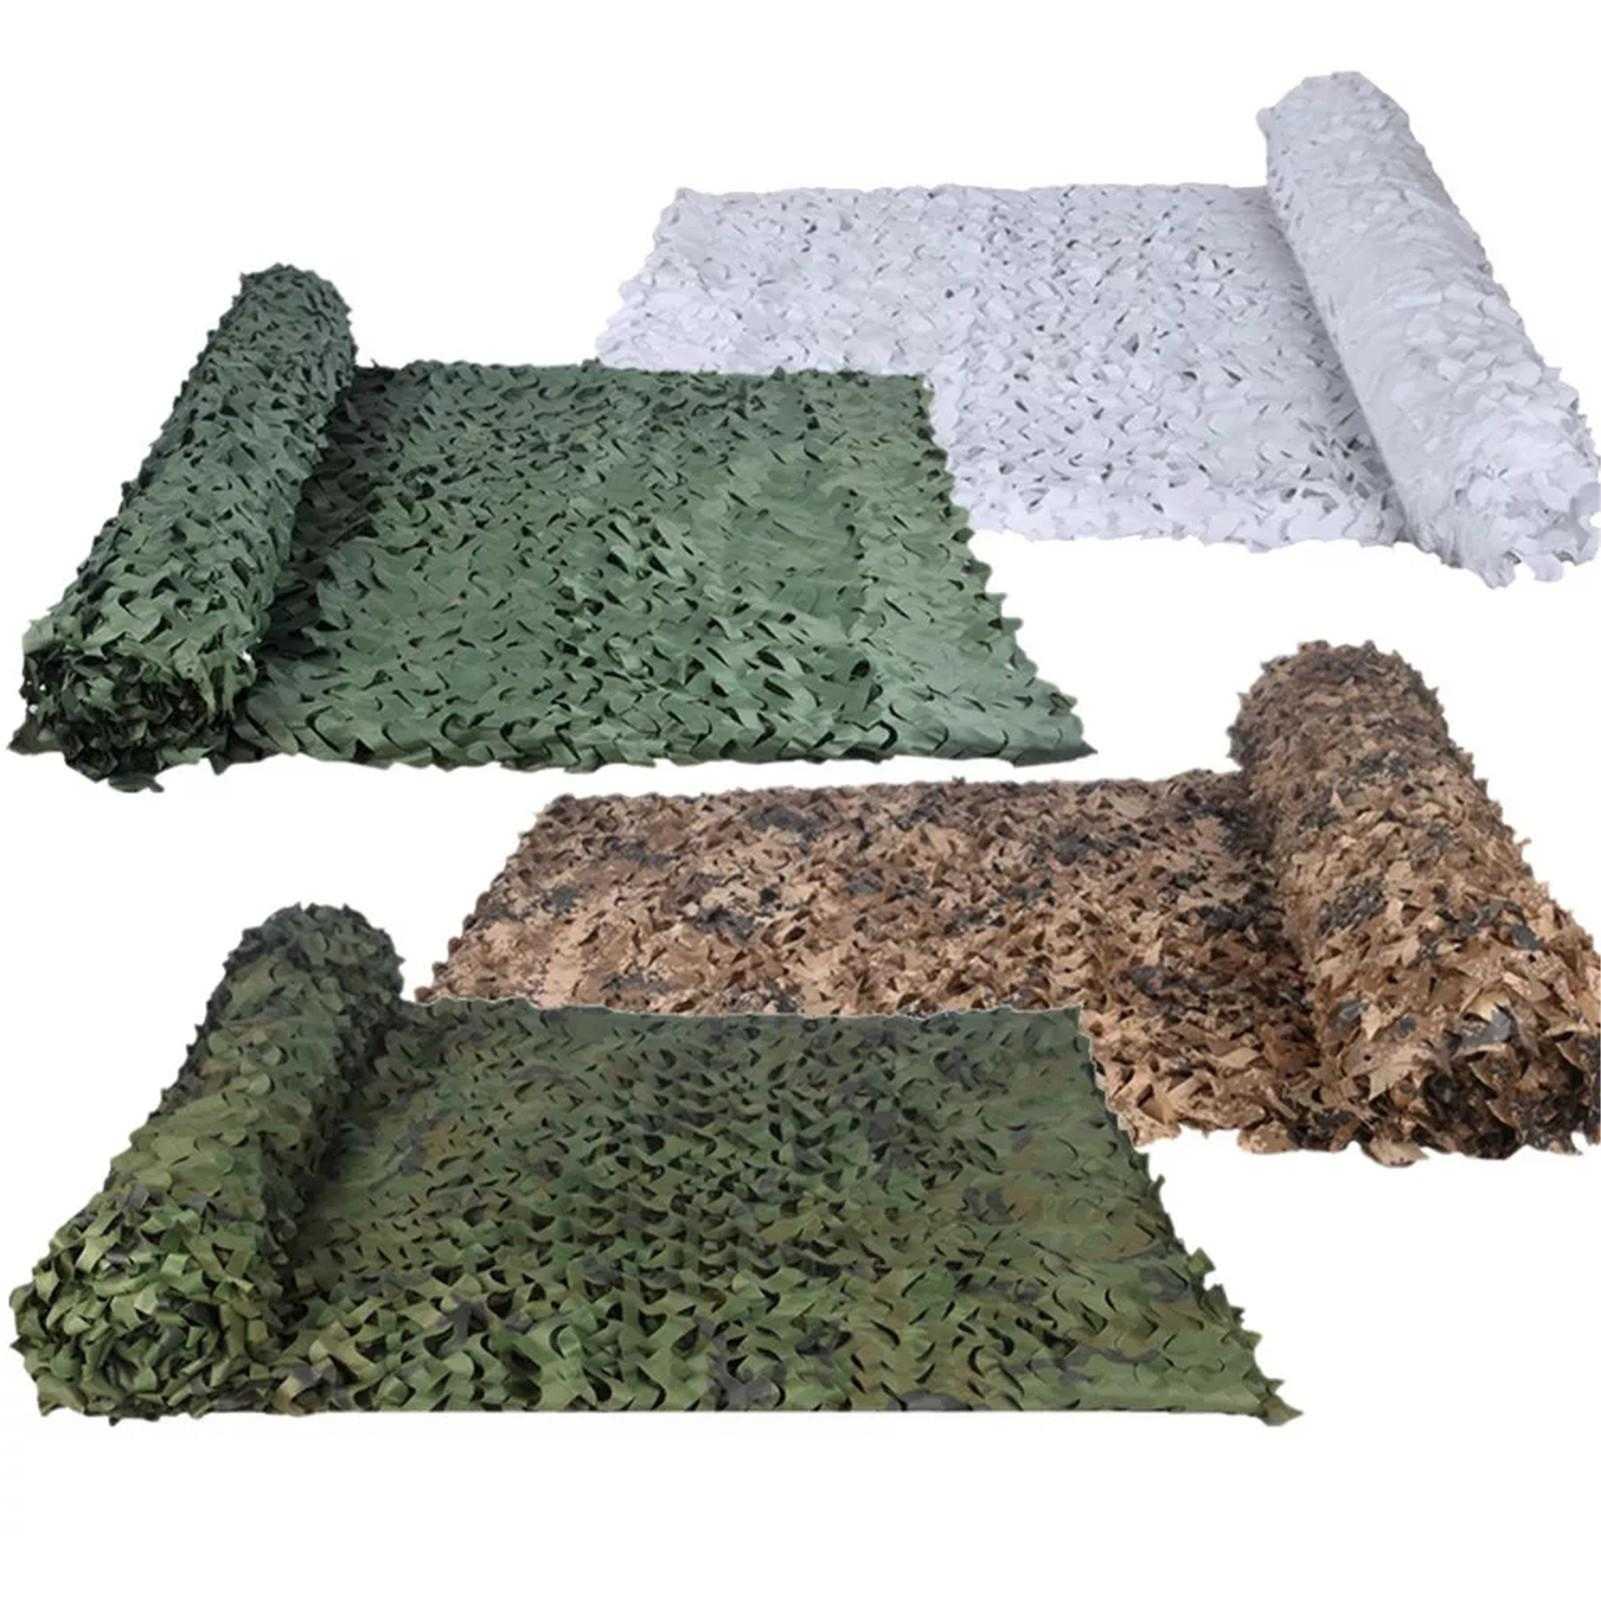 Multi Size Hunting Military Camouflage Net Hiding Mesh Sun Shelter Woodland Camo Camping Sun Shade for Garden Pergolas Awning Y0706 от DHgate WW